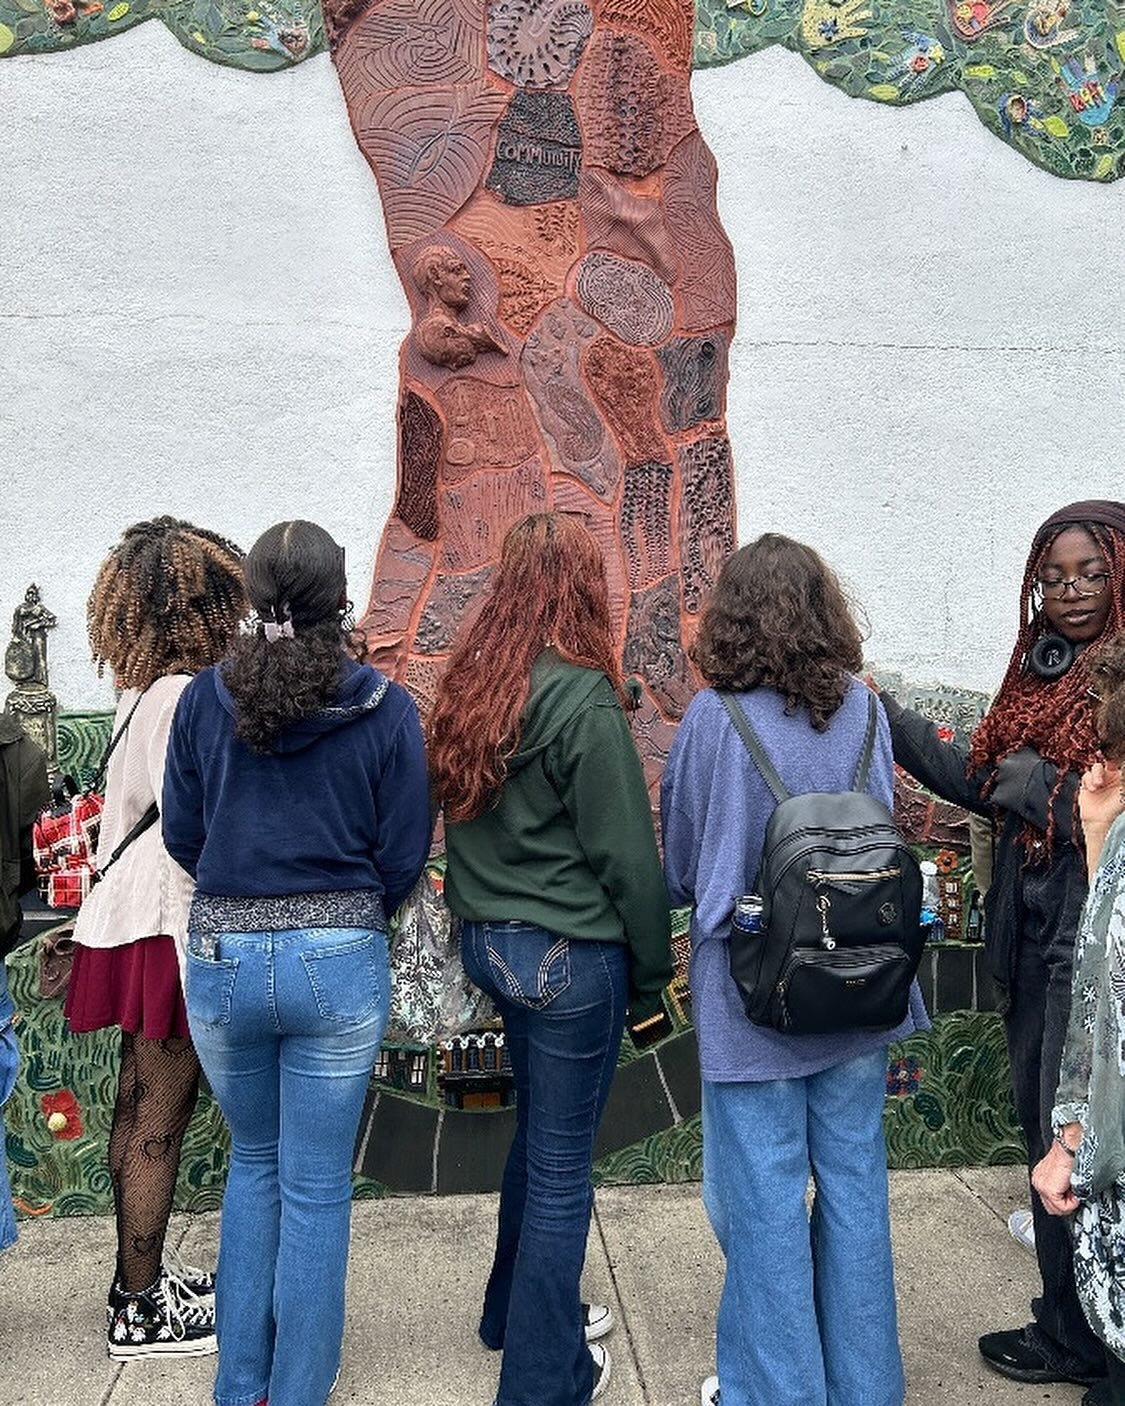 Did you know that Clay Art Center has created mosaic projects throughout Westchester and Fairfield counties? As part of our community arts programming, we partner with schools and other organizations to help beautify spaces and bring ceramic art into